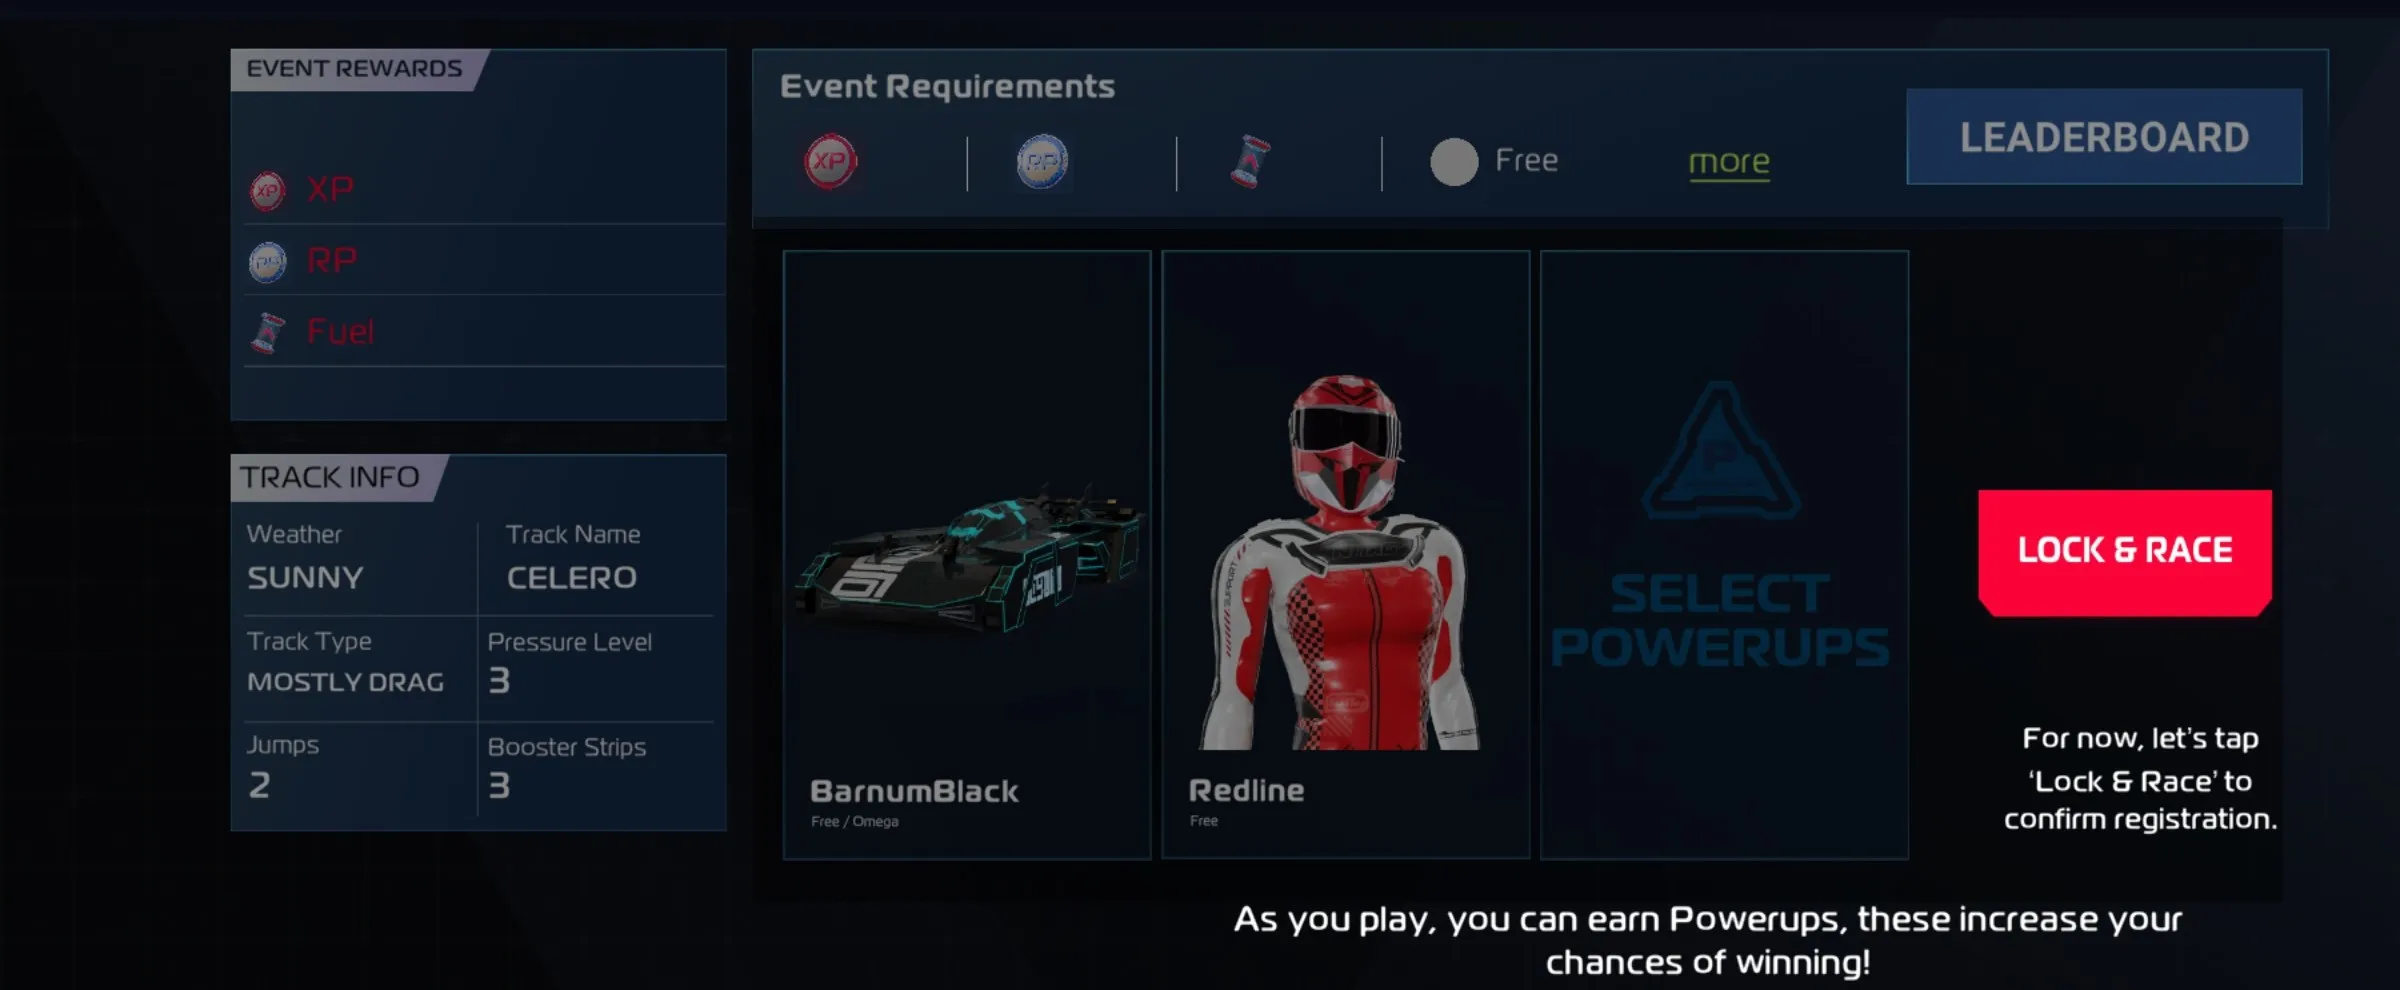 When you enter a race, you must select your car, racer, and any available powerups. This section also contains race track information and event rewards.